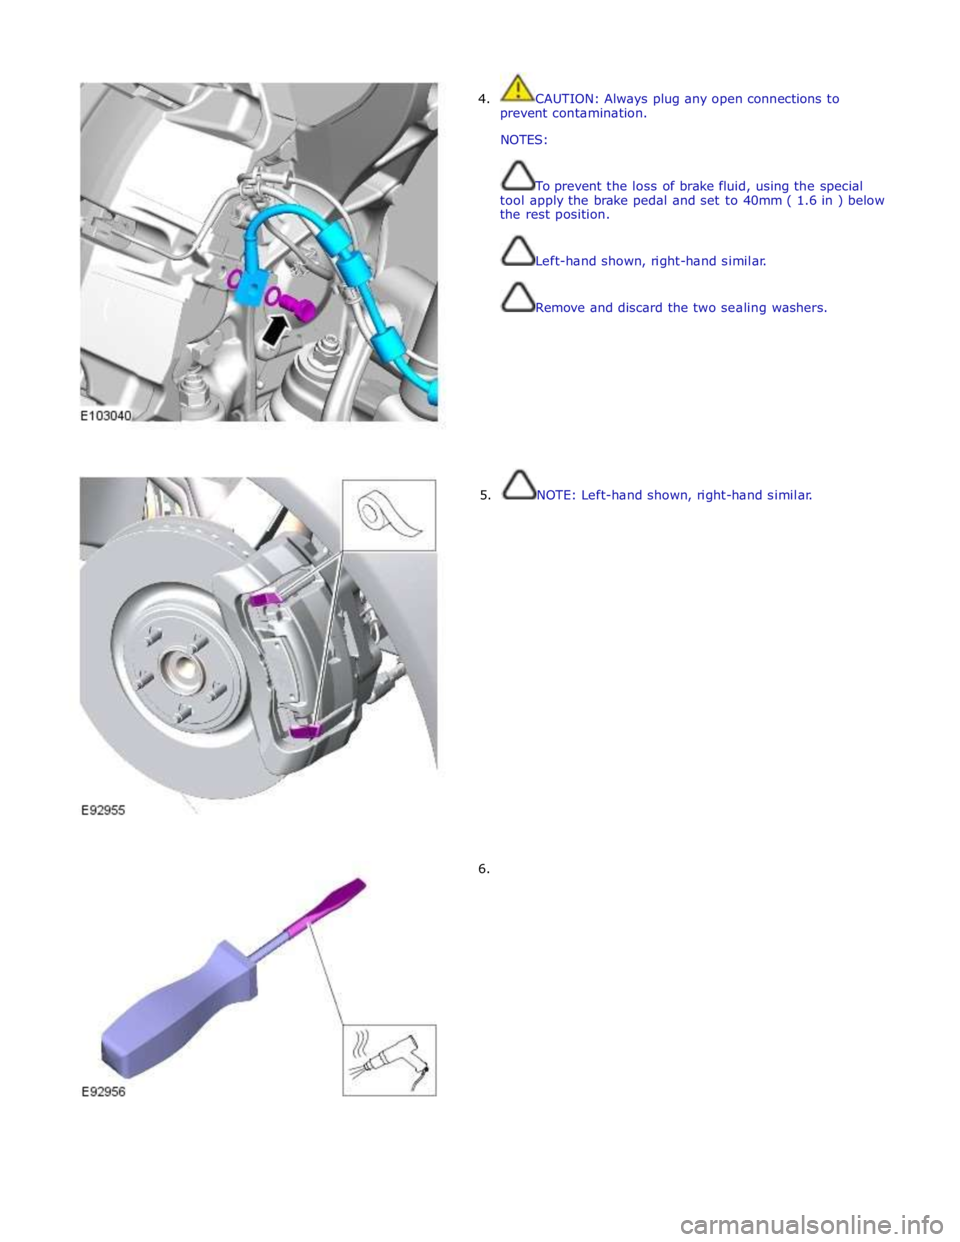 JAGUAR XFR 2010 1.G Owners Manual  
4.  CAUTION: Always plug any open connections to 
prevent contamination. 
NOTES: 
 
 
To prevent the loss of brake fluid, using the special 
tool apply the brake pedal and set to 40mm ( 1.6 in ) bel